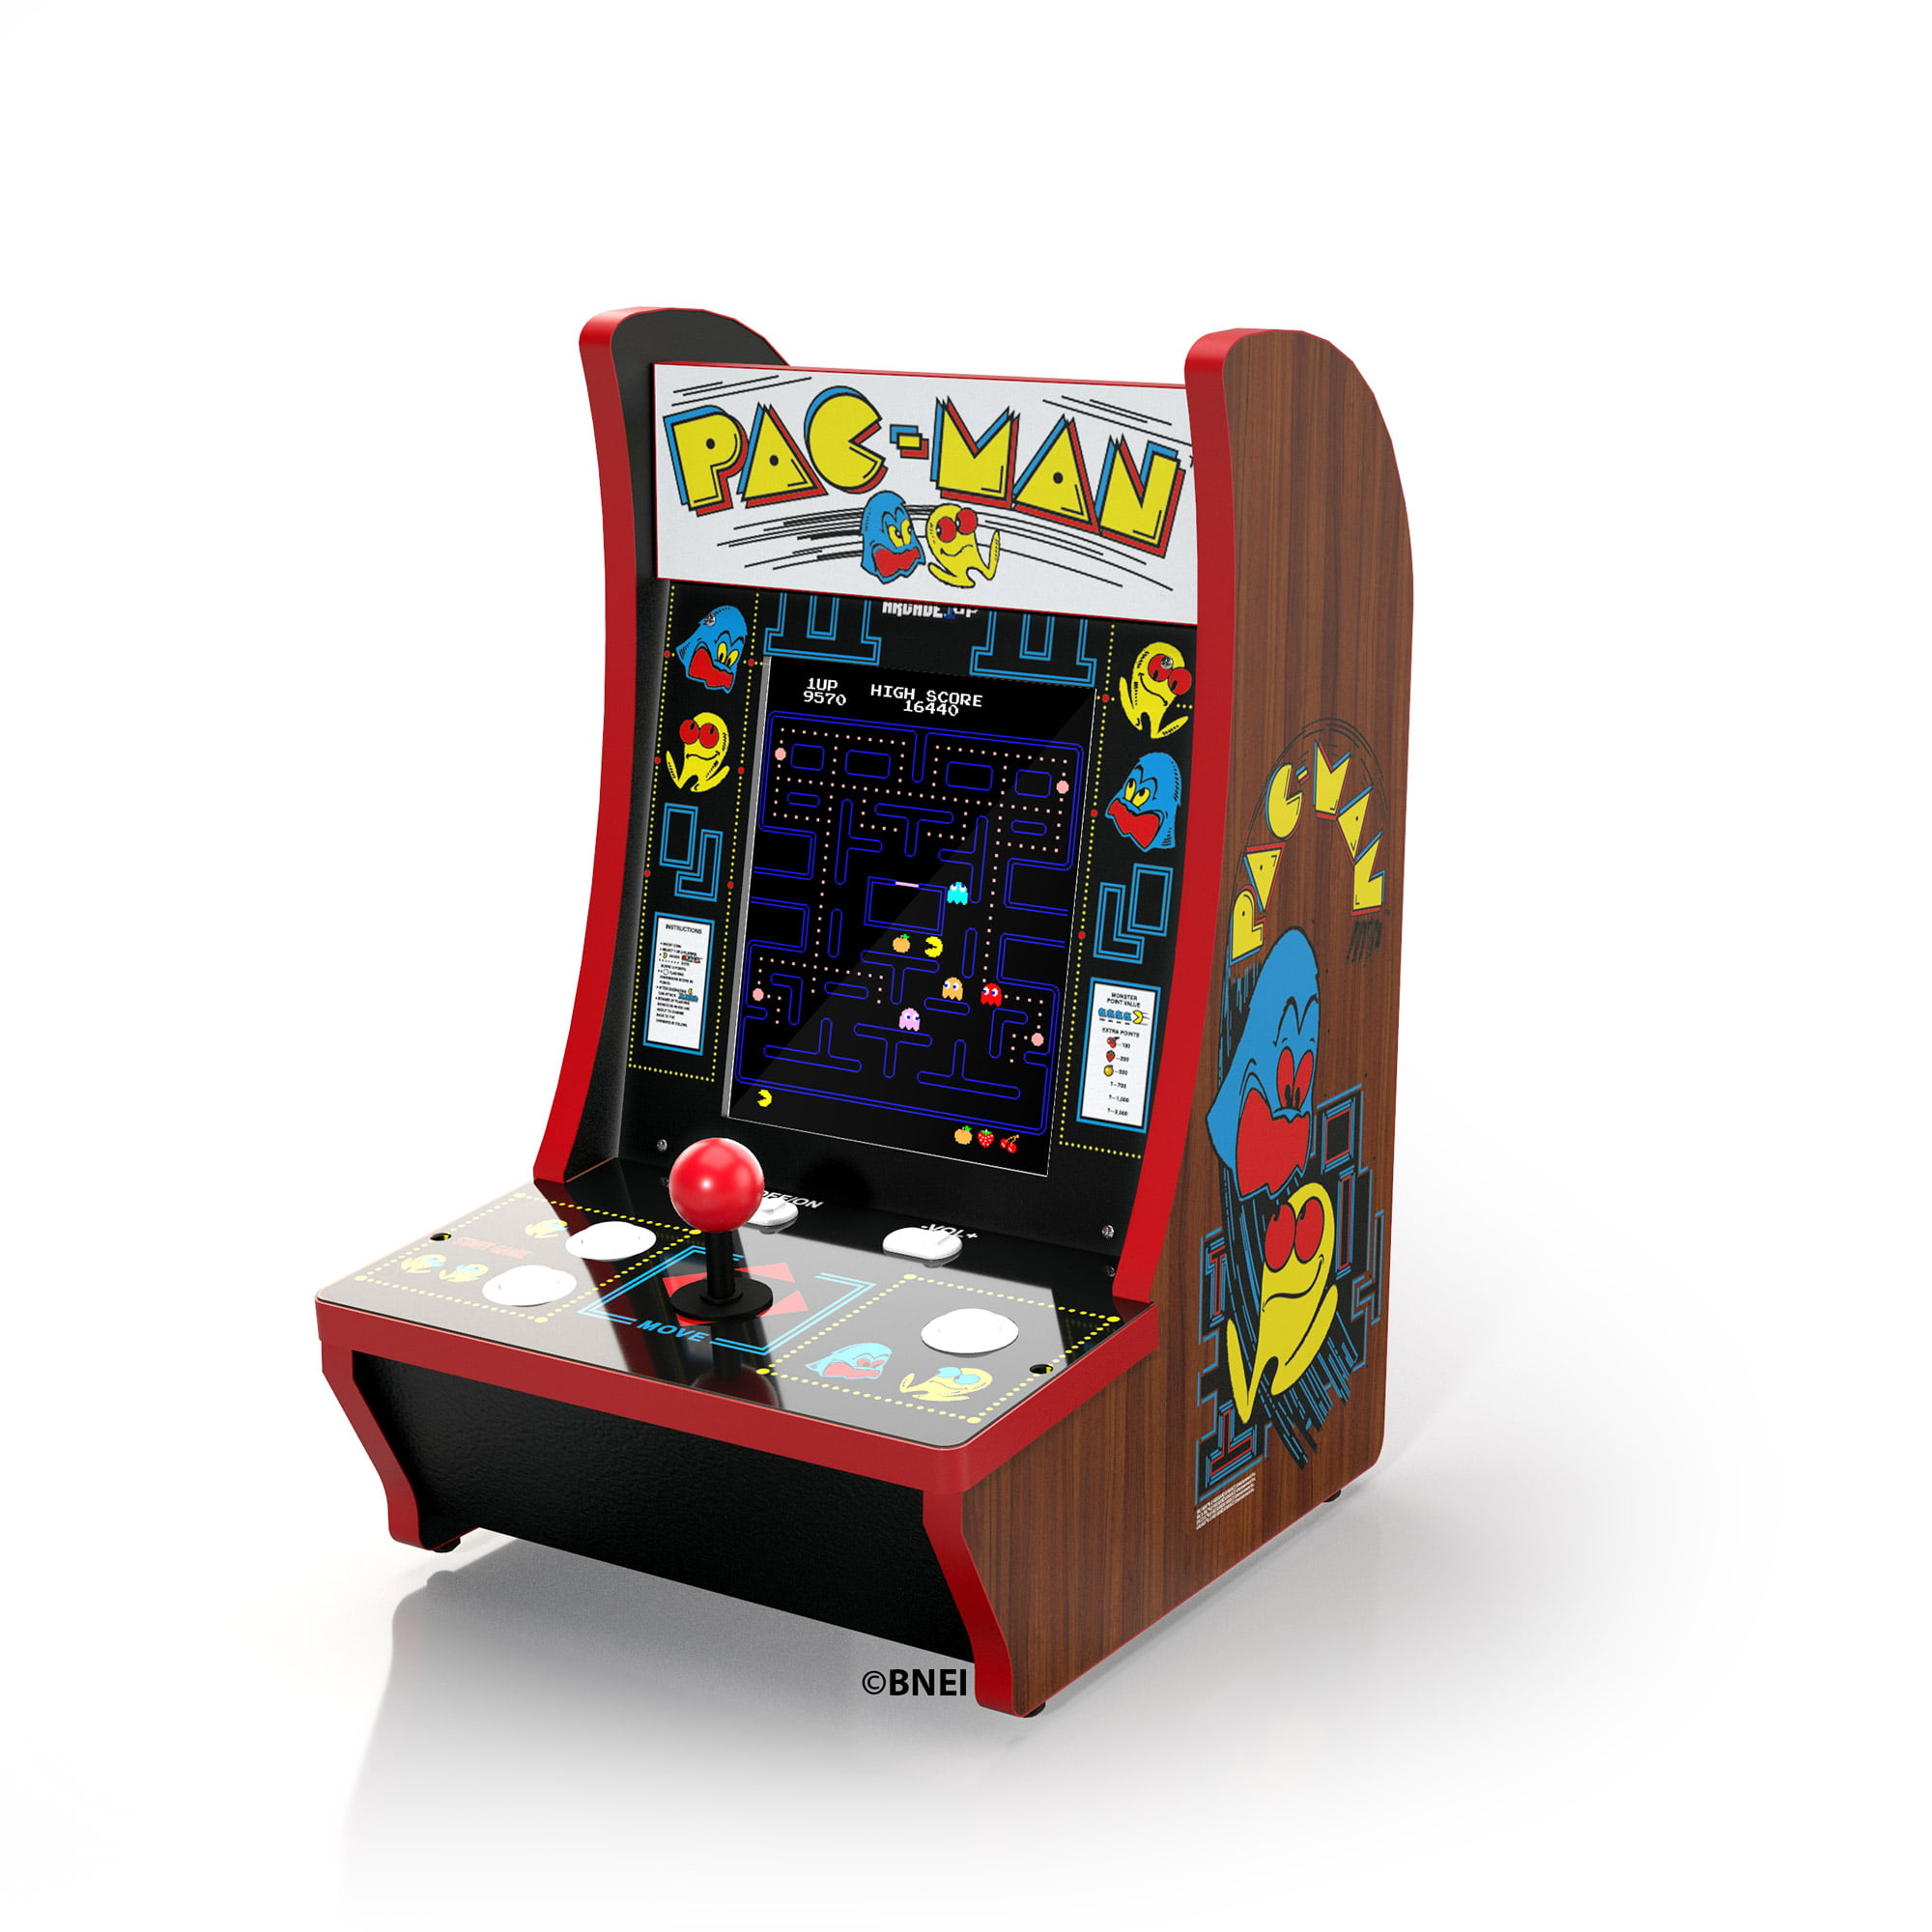 Original Ultracade Arcade Game - Multi Game System 40 Games Upgradeable